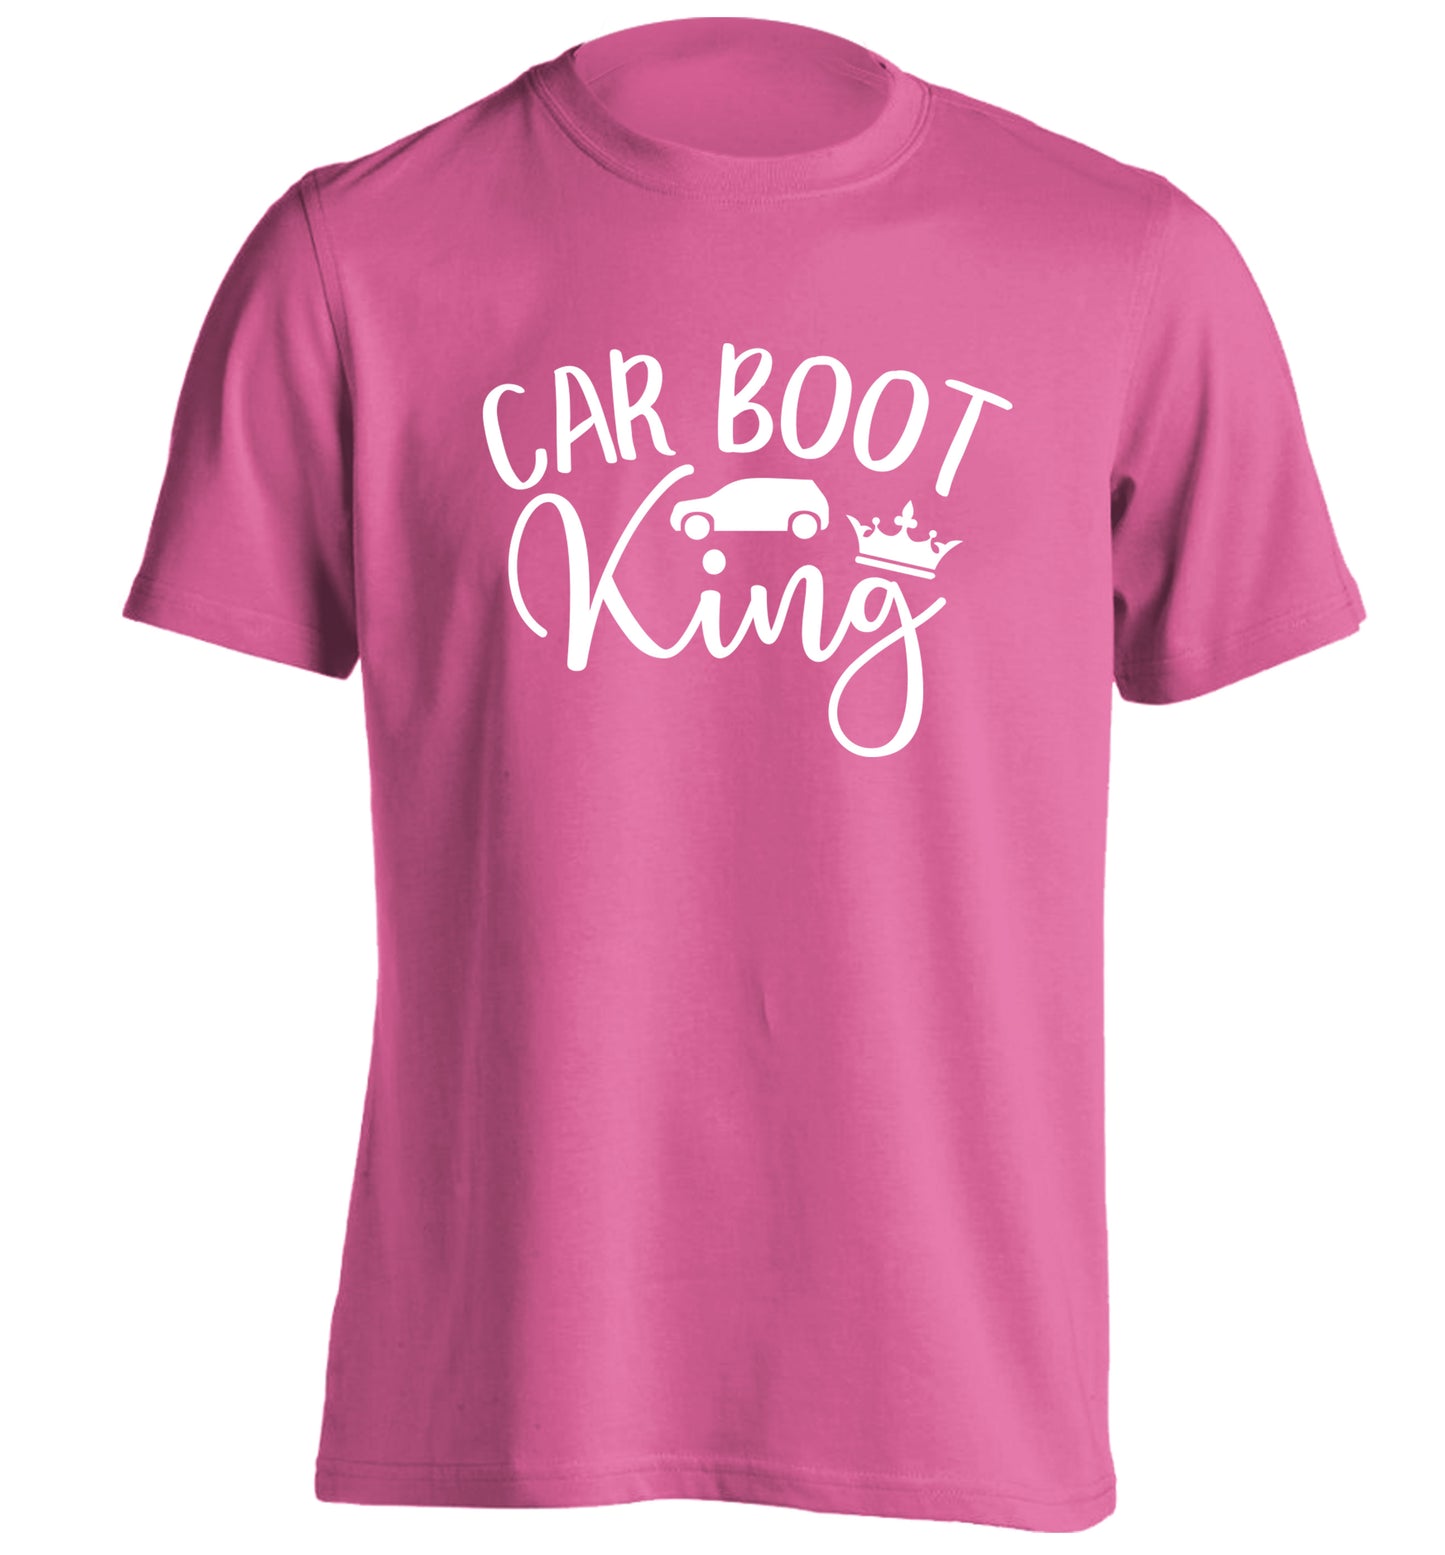 Carboot King adults unisex pink Tshirt 2XL